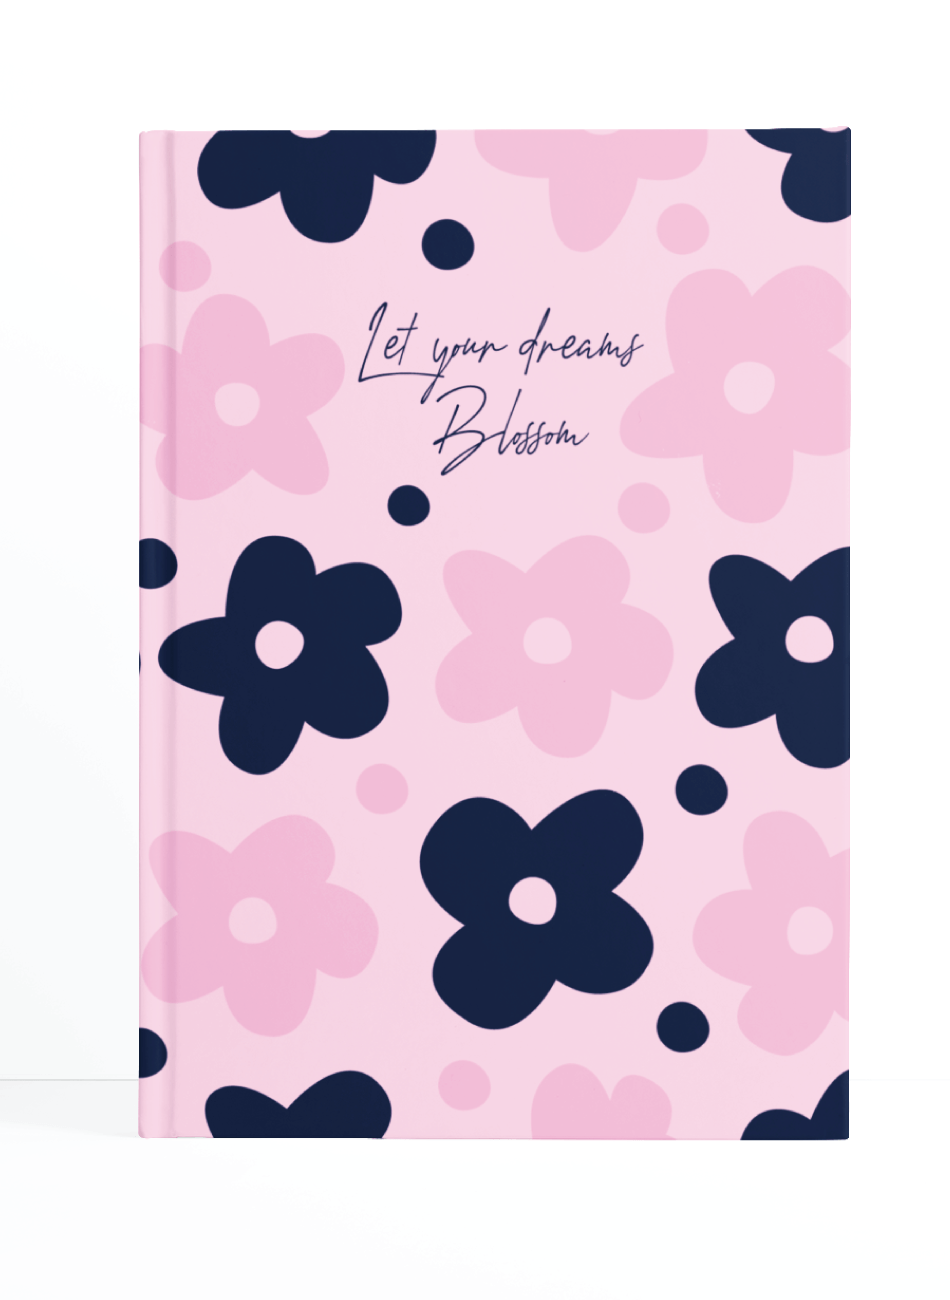 Let your dreams Blossom Notebook | Available in various sizes